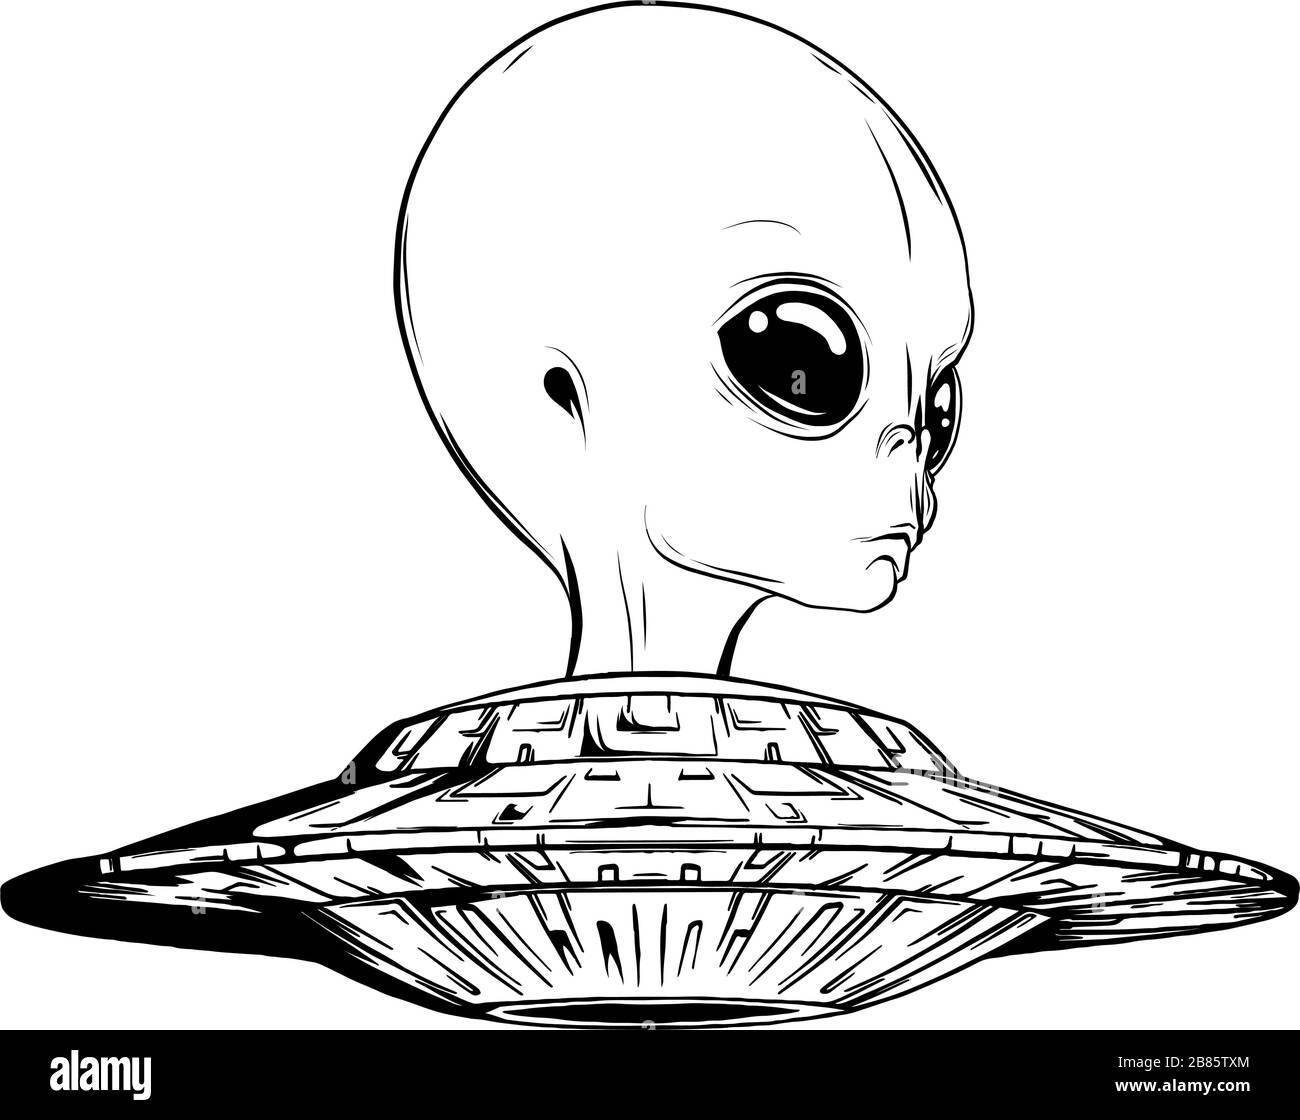 Aliens and ufo vector objects and design elements in monochrome style isolated on white background Stock Vector